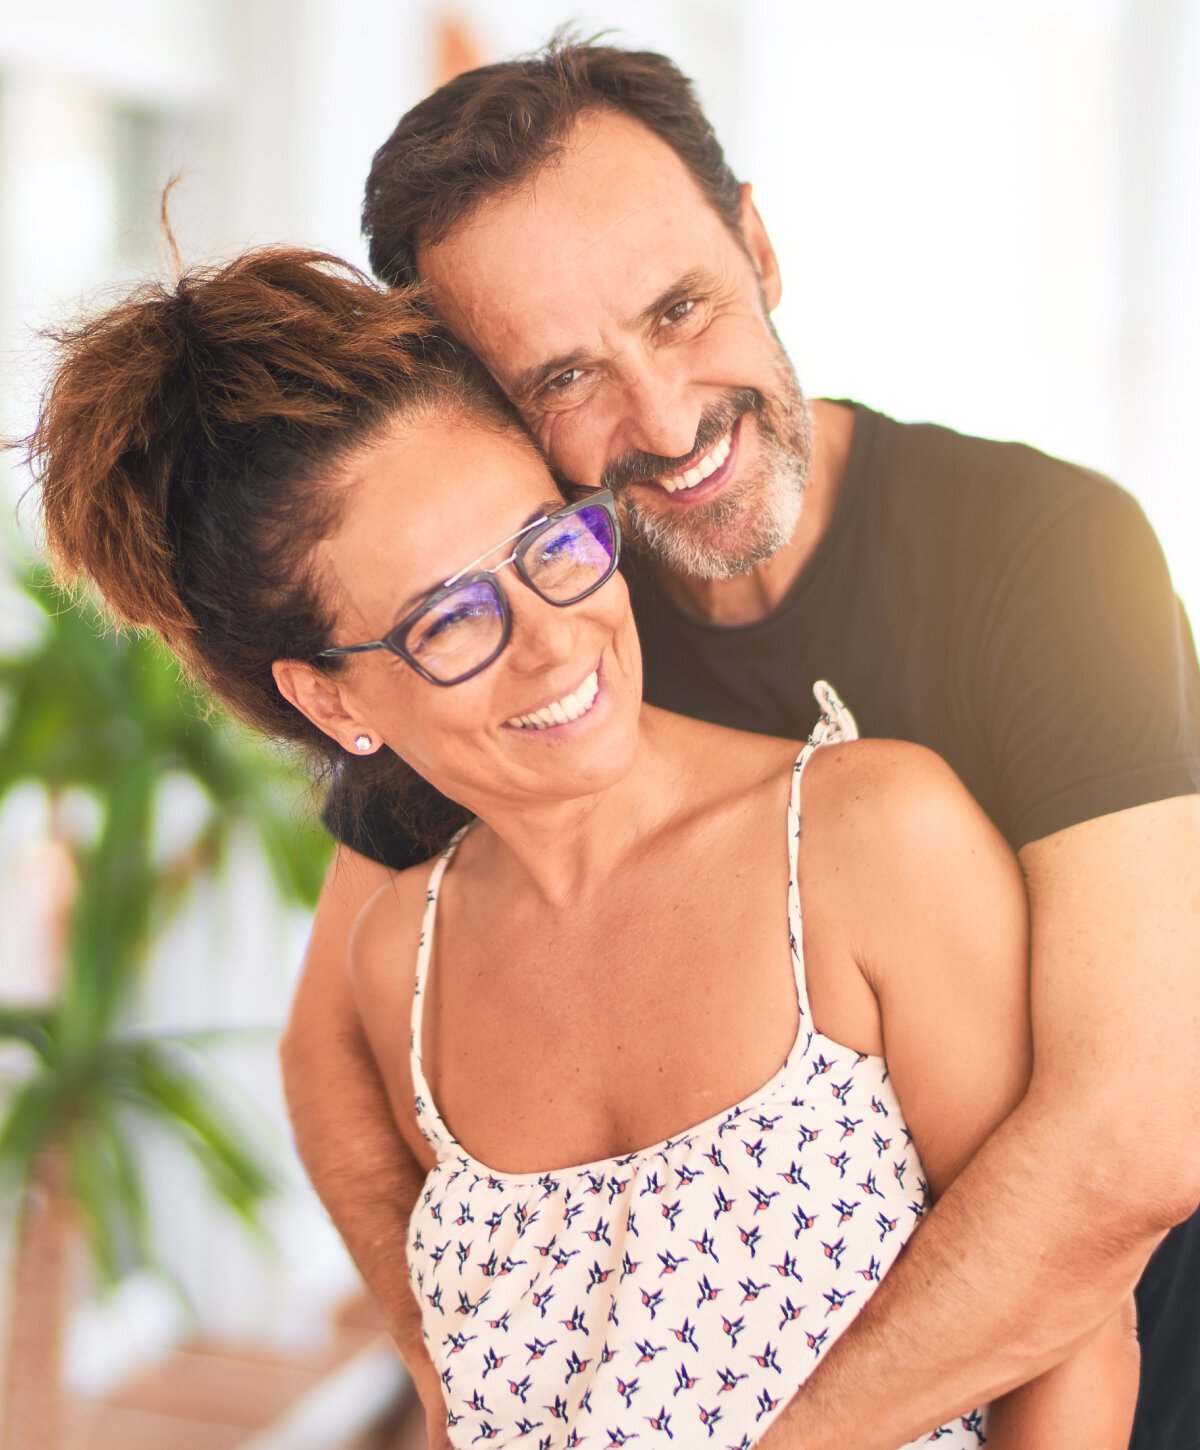 dental implant patient models couple smiling and embracing